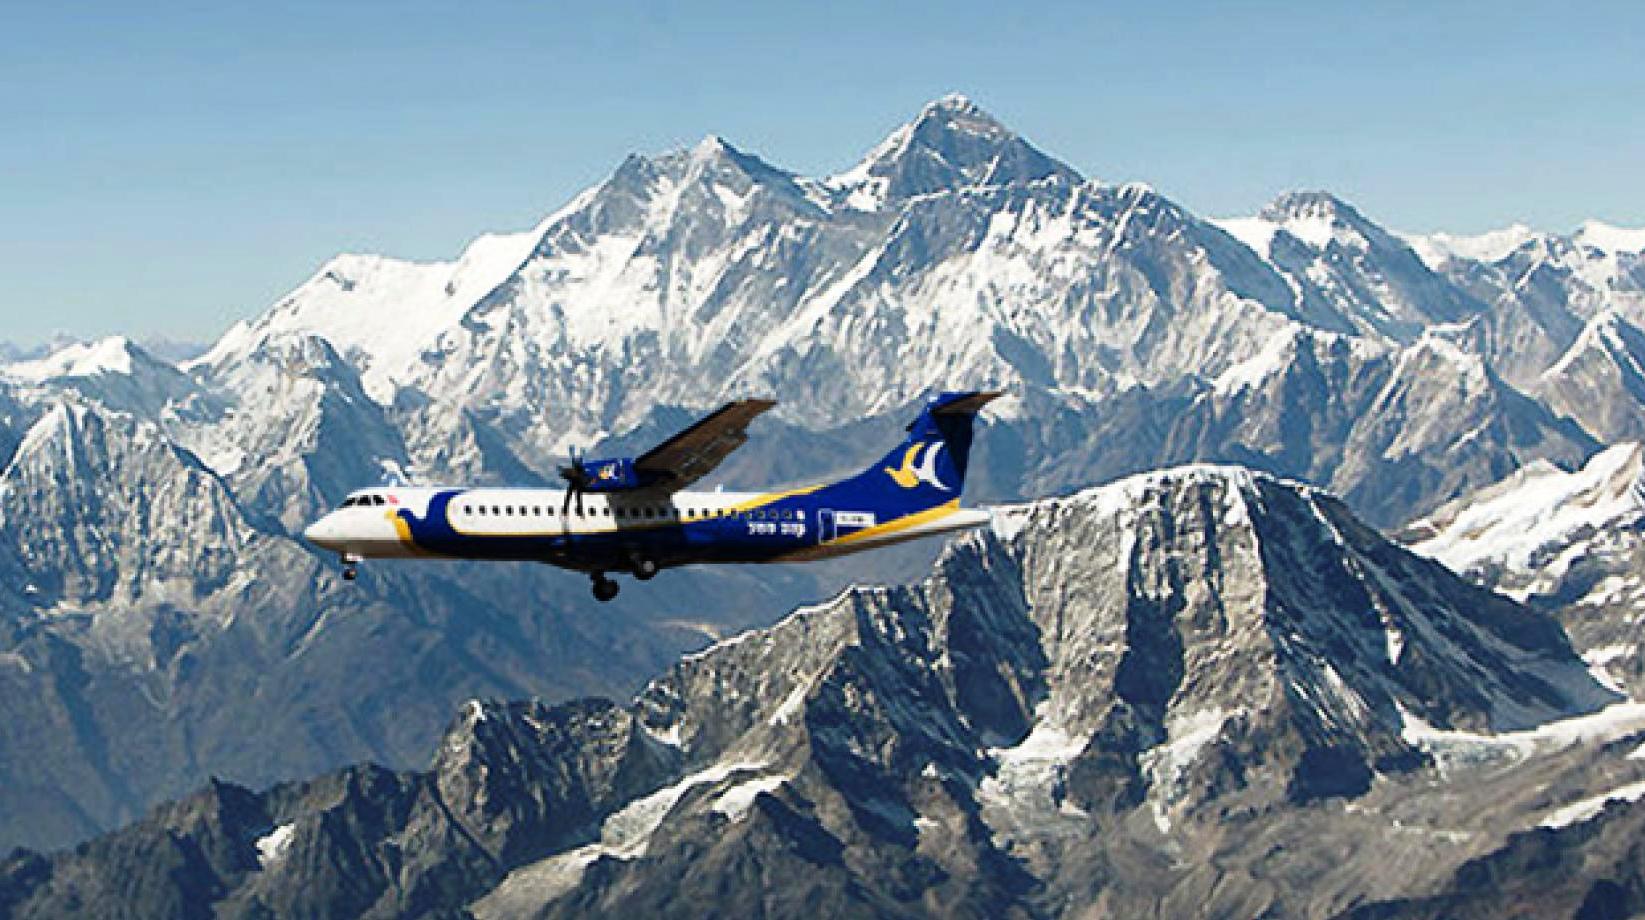 Everest Mountain flights by Plane